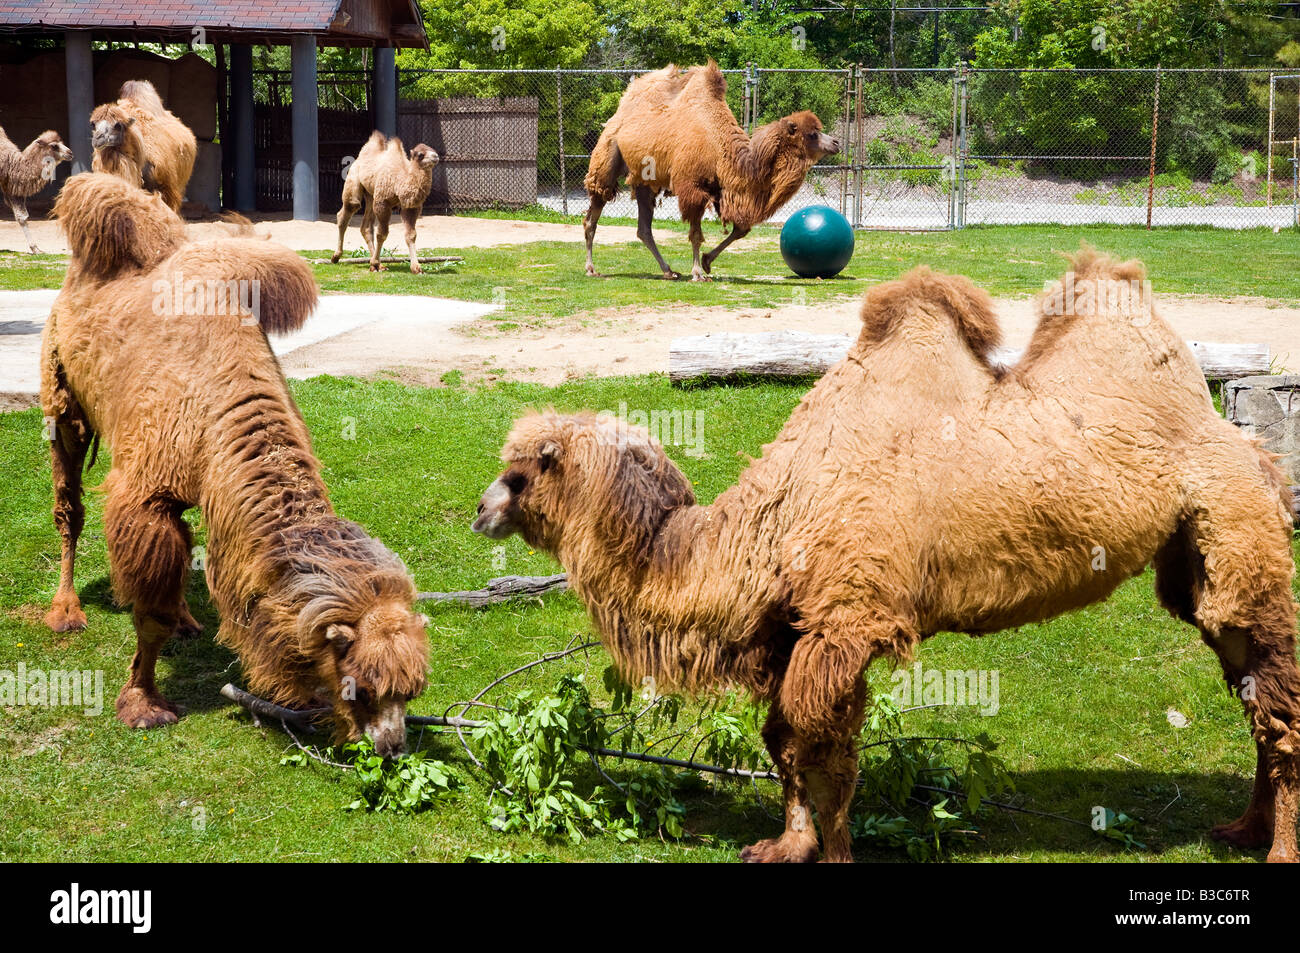 Six Camels engaged in various activities Stock Photo